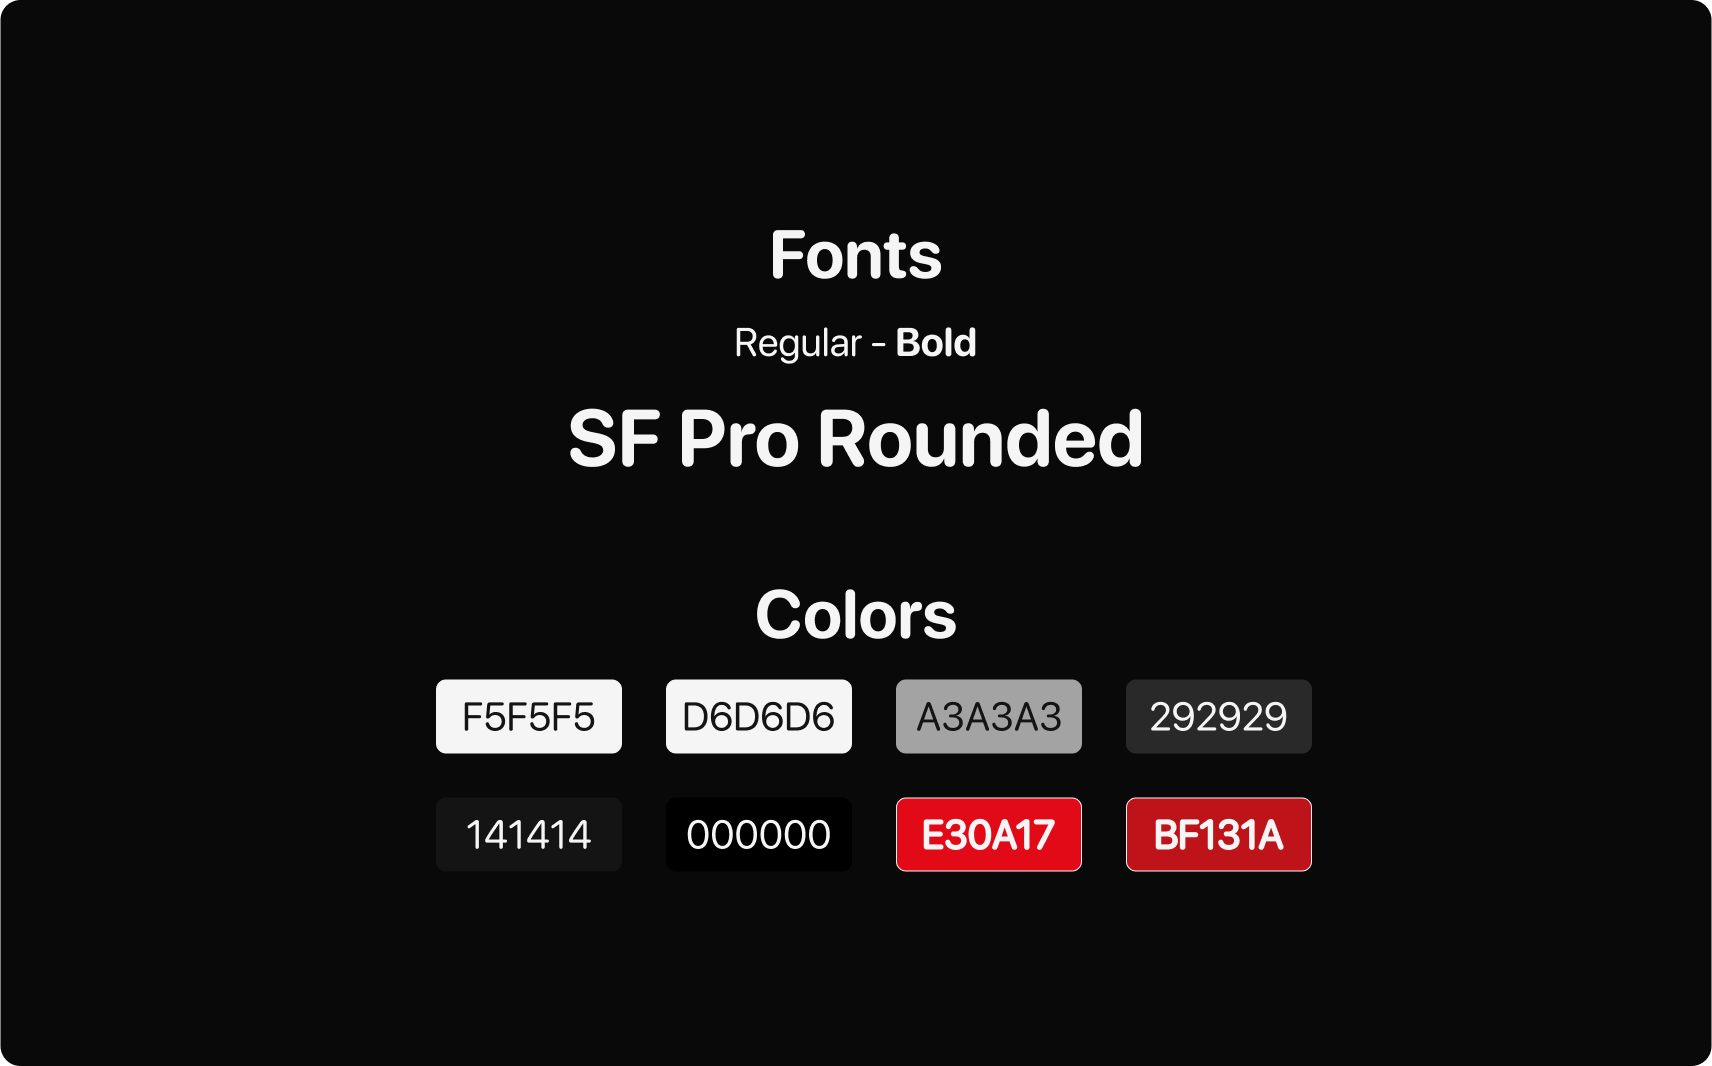 Color pallet and fonts